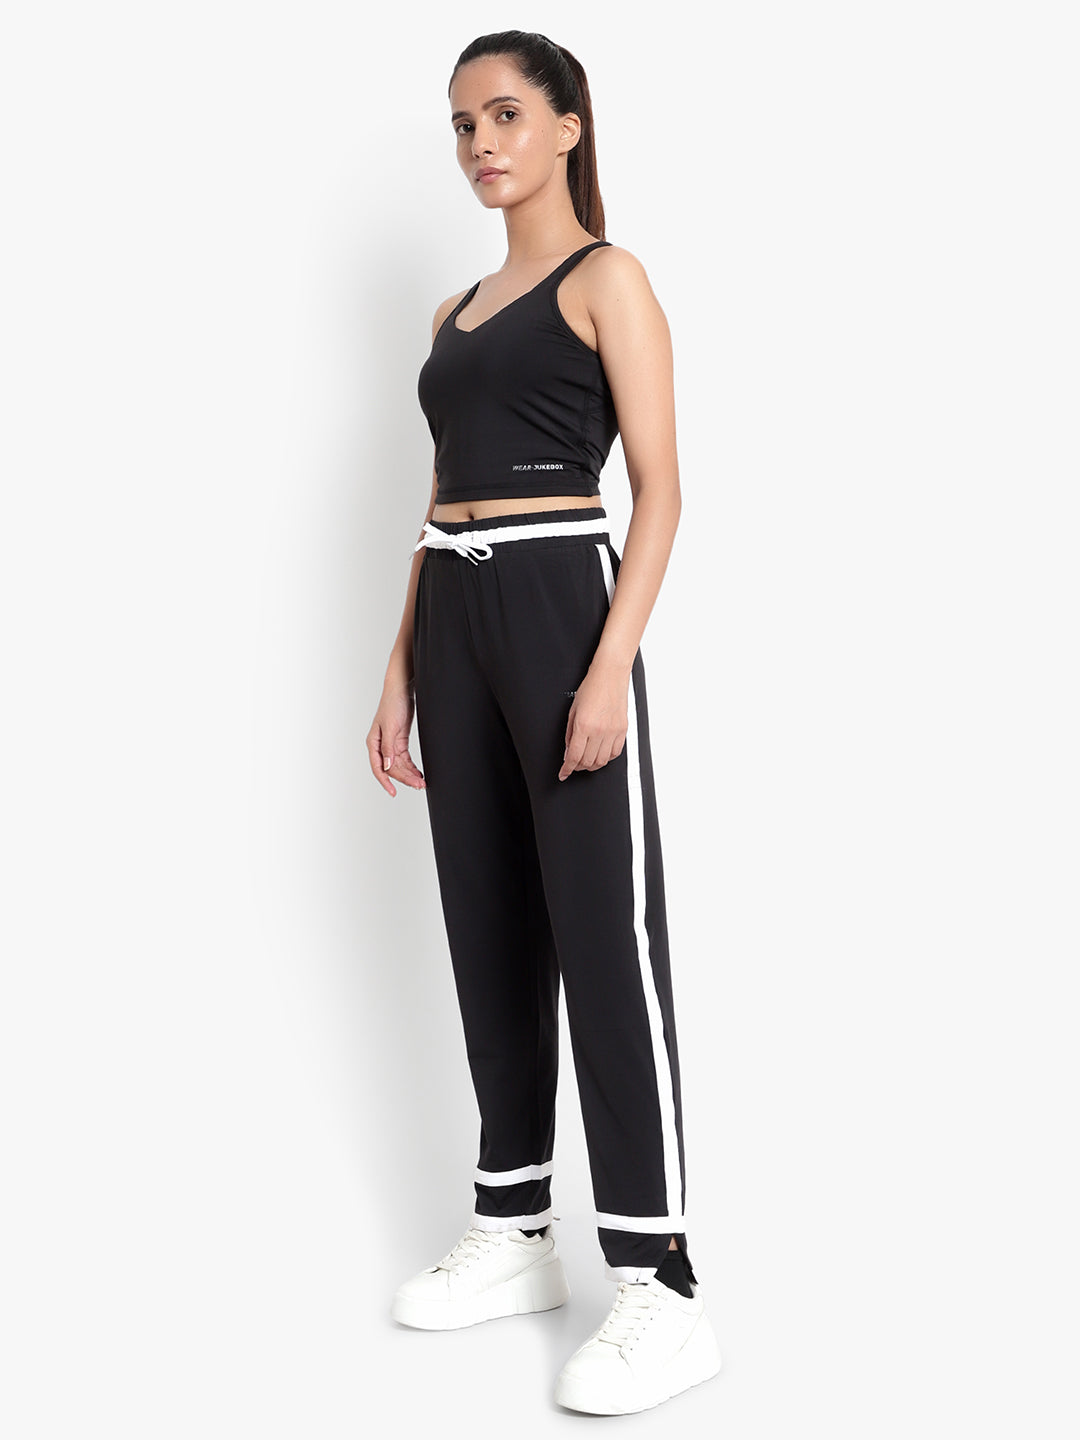 Axis Tank Top & Track Pant - Black